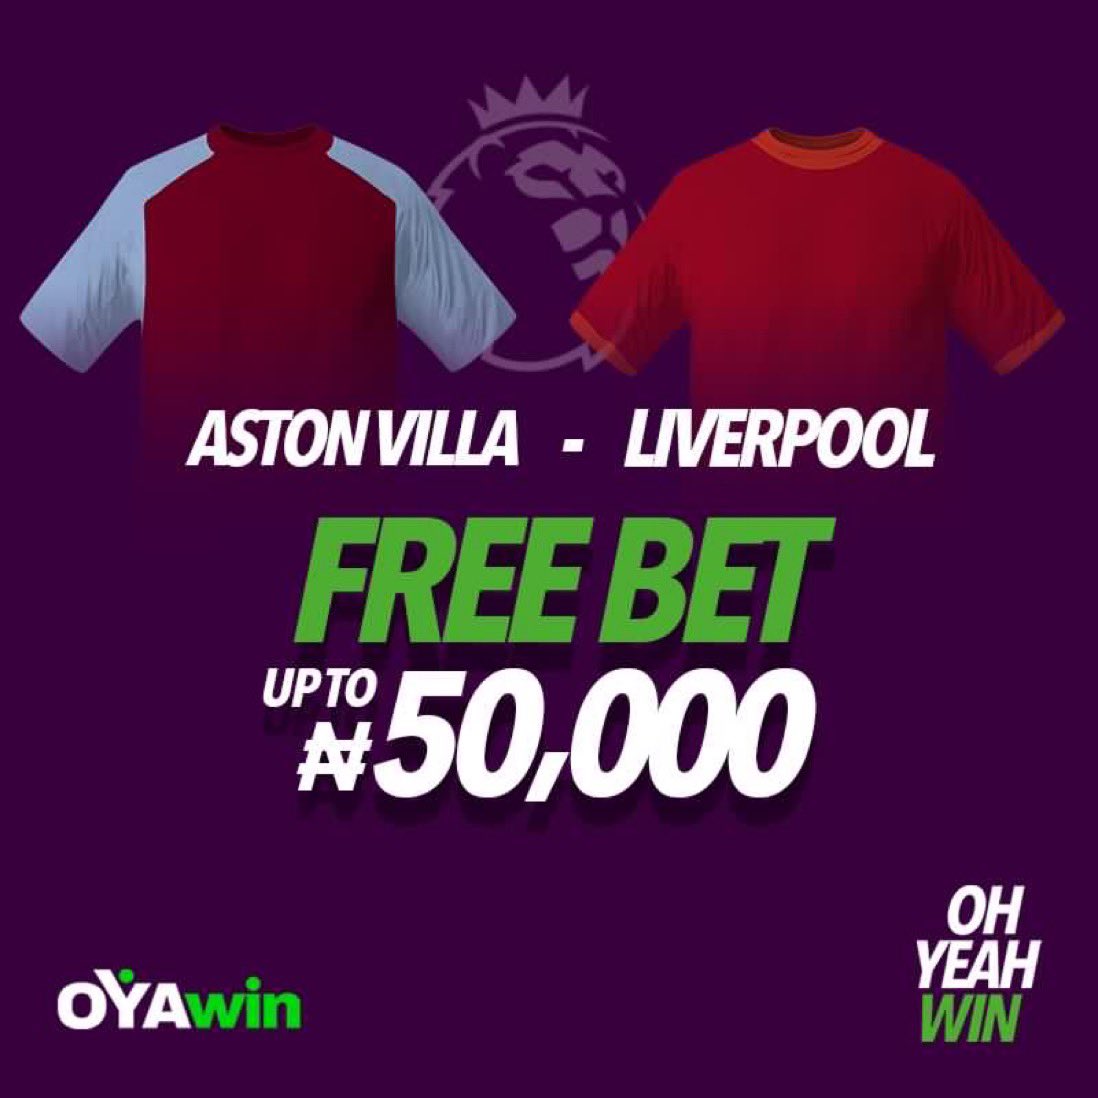 Today’s football match might be the reason you become a millionaire if you place your bet with a minimum of N100 bet and receive 100% bonus bet. Dont say I didn’t put you on 🫰🏽 #OhhYeahWin Tap here to get started: oyawin.com/register?pbz=7…